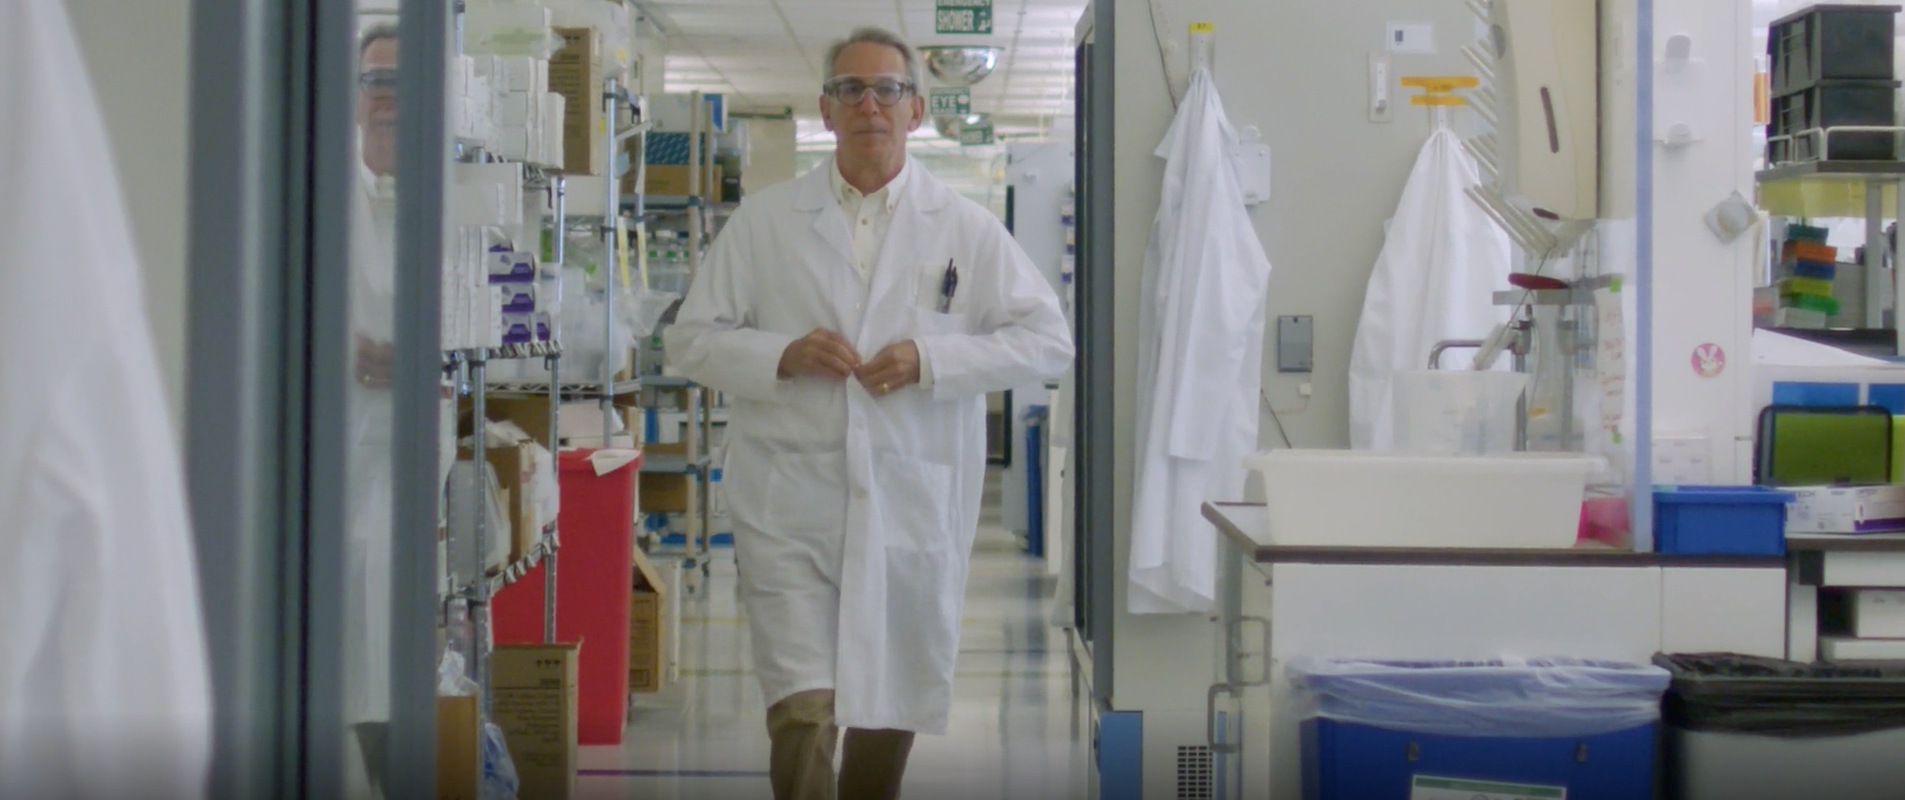 In a lab setting, an older man with white hair and glasses buttons up a lab coat as he walks towards the camera. 